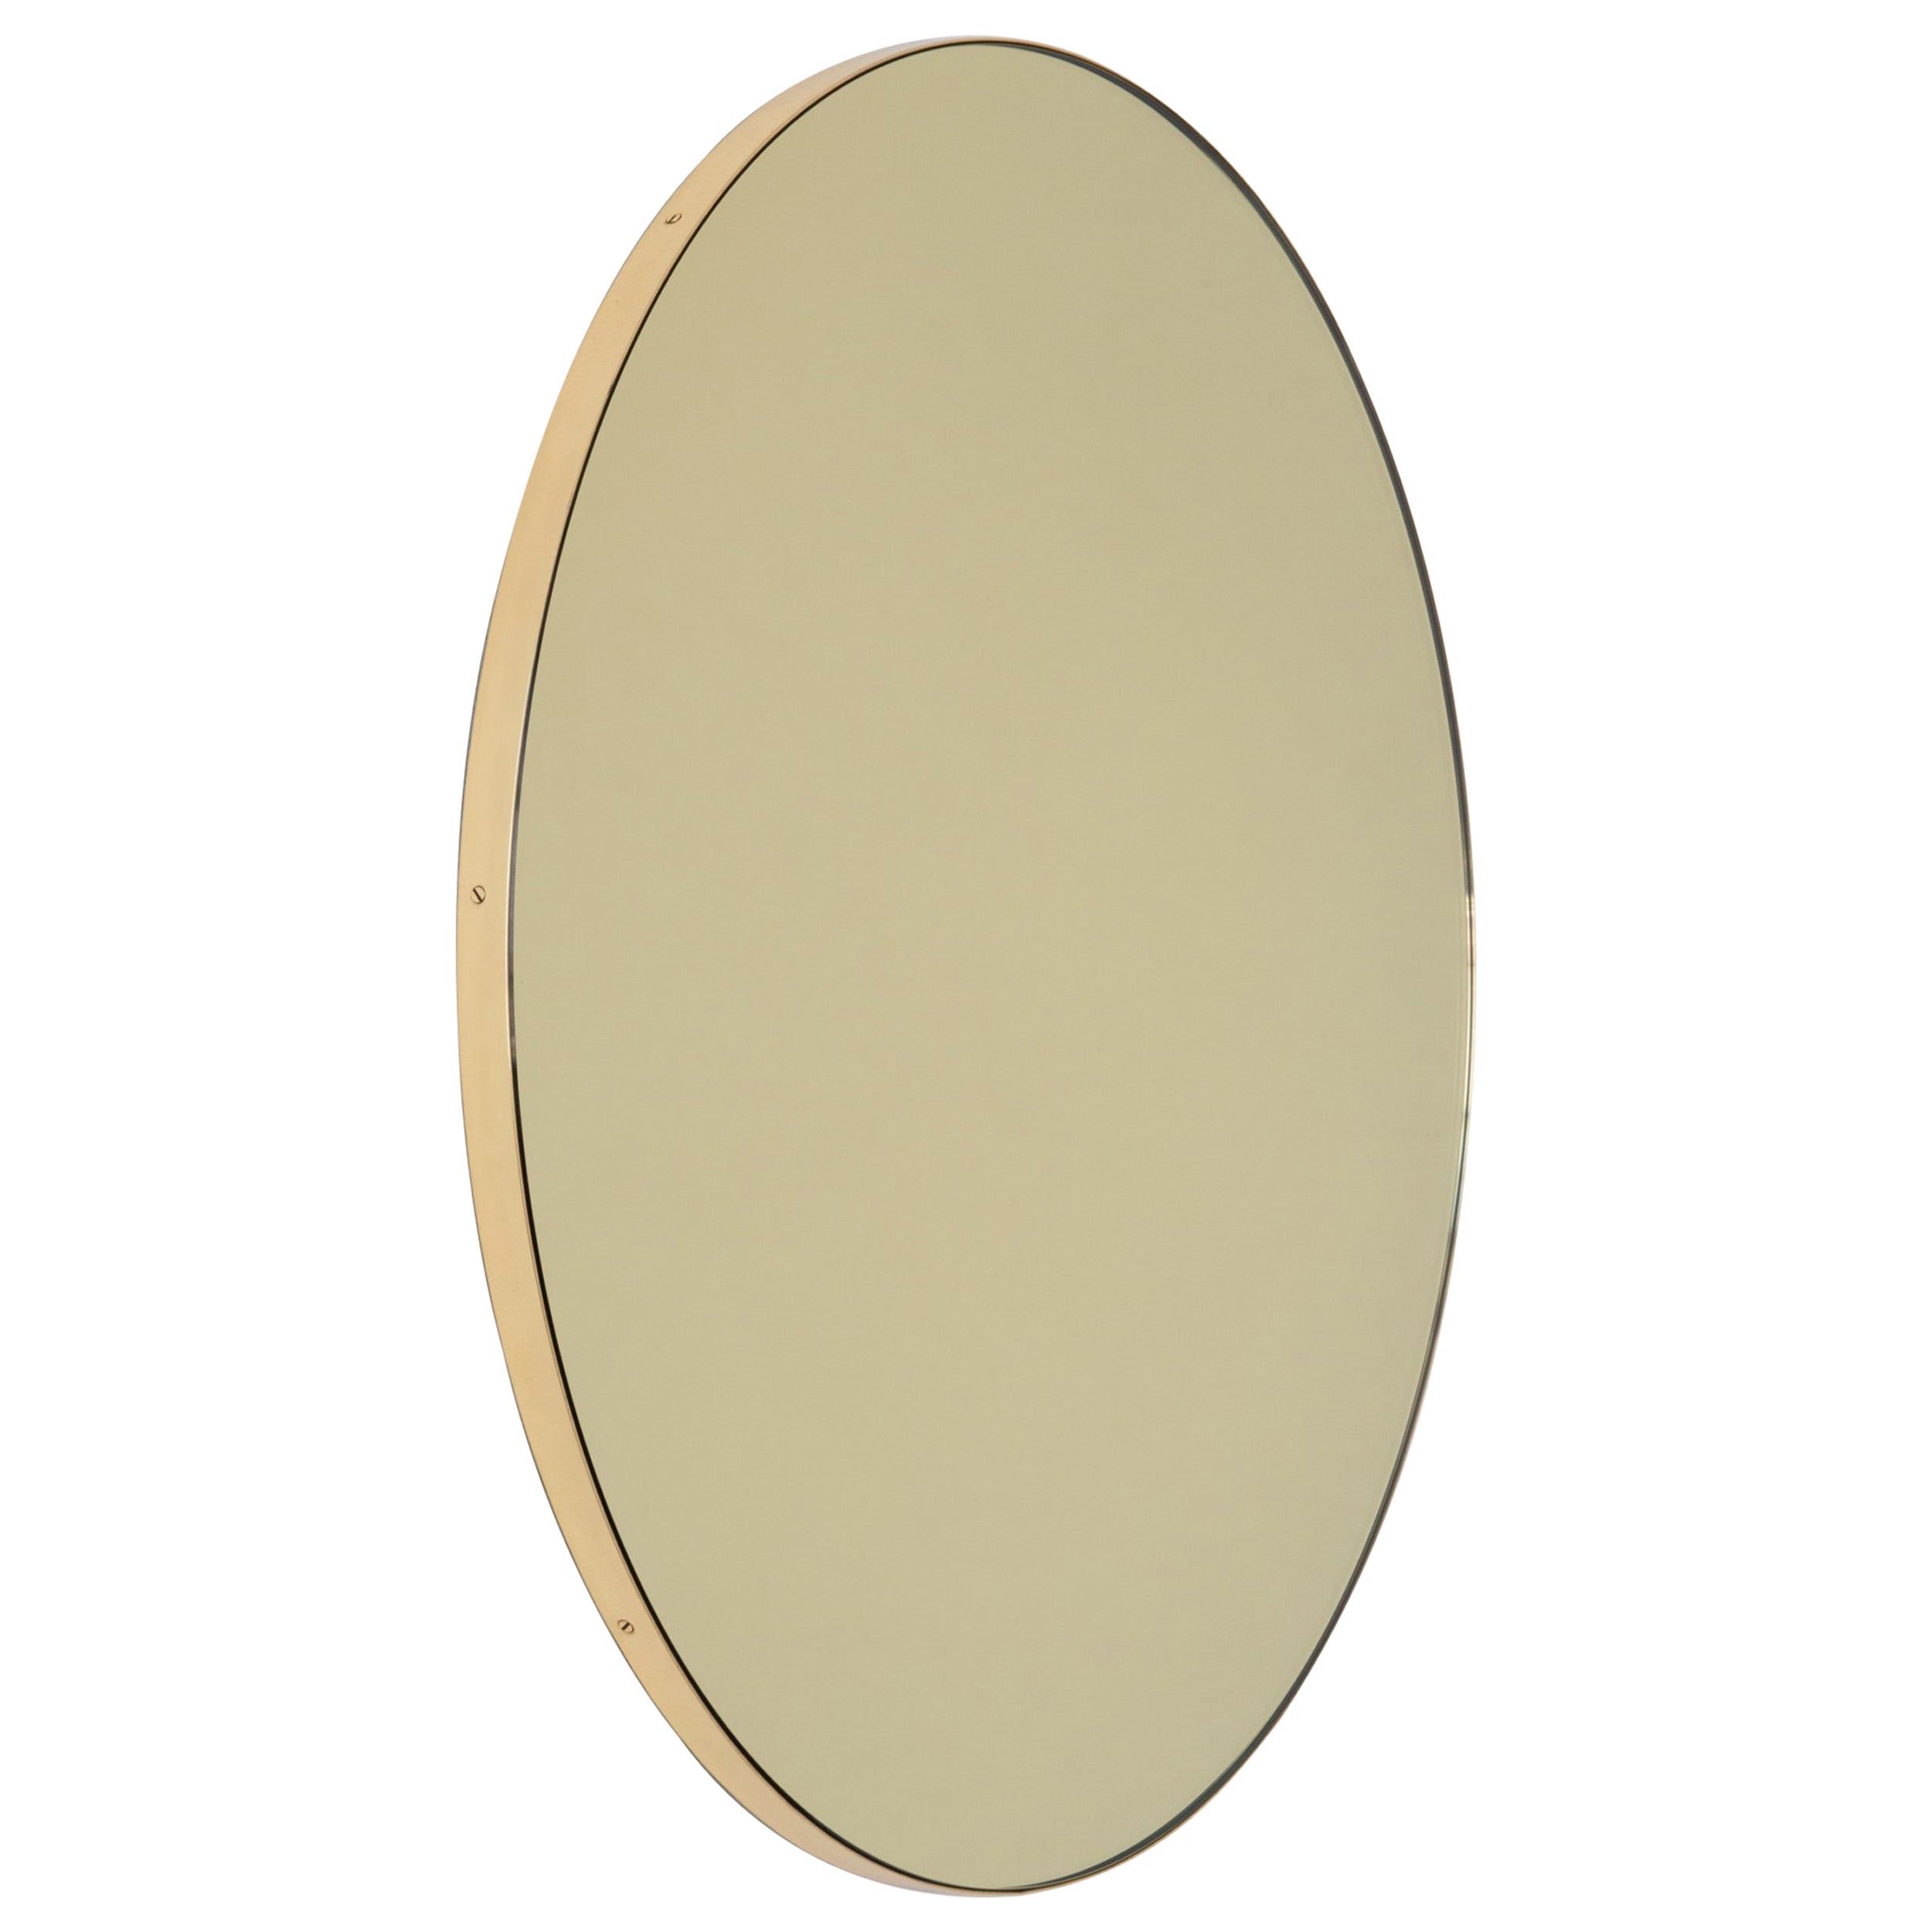 Orbis Gold Tinted Round Contemporary Mirror with Brass Frame, Small